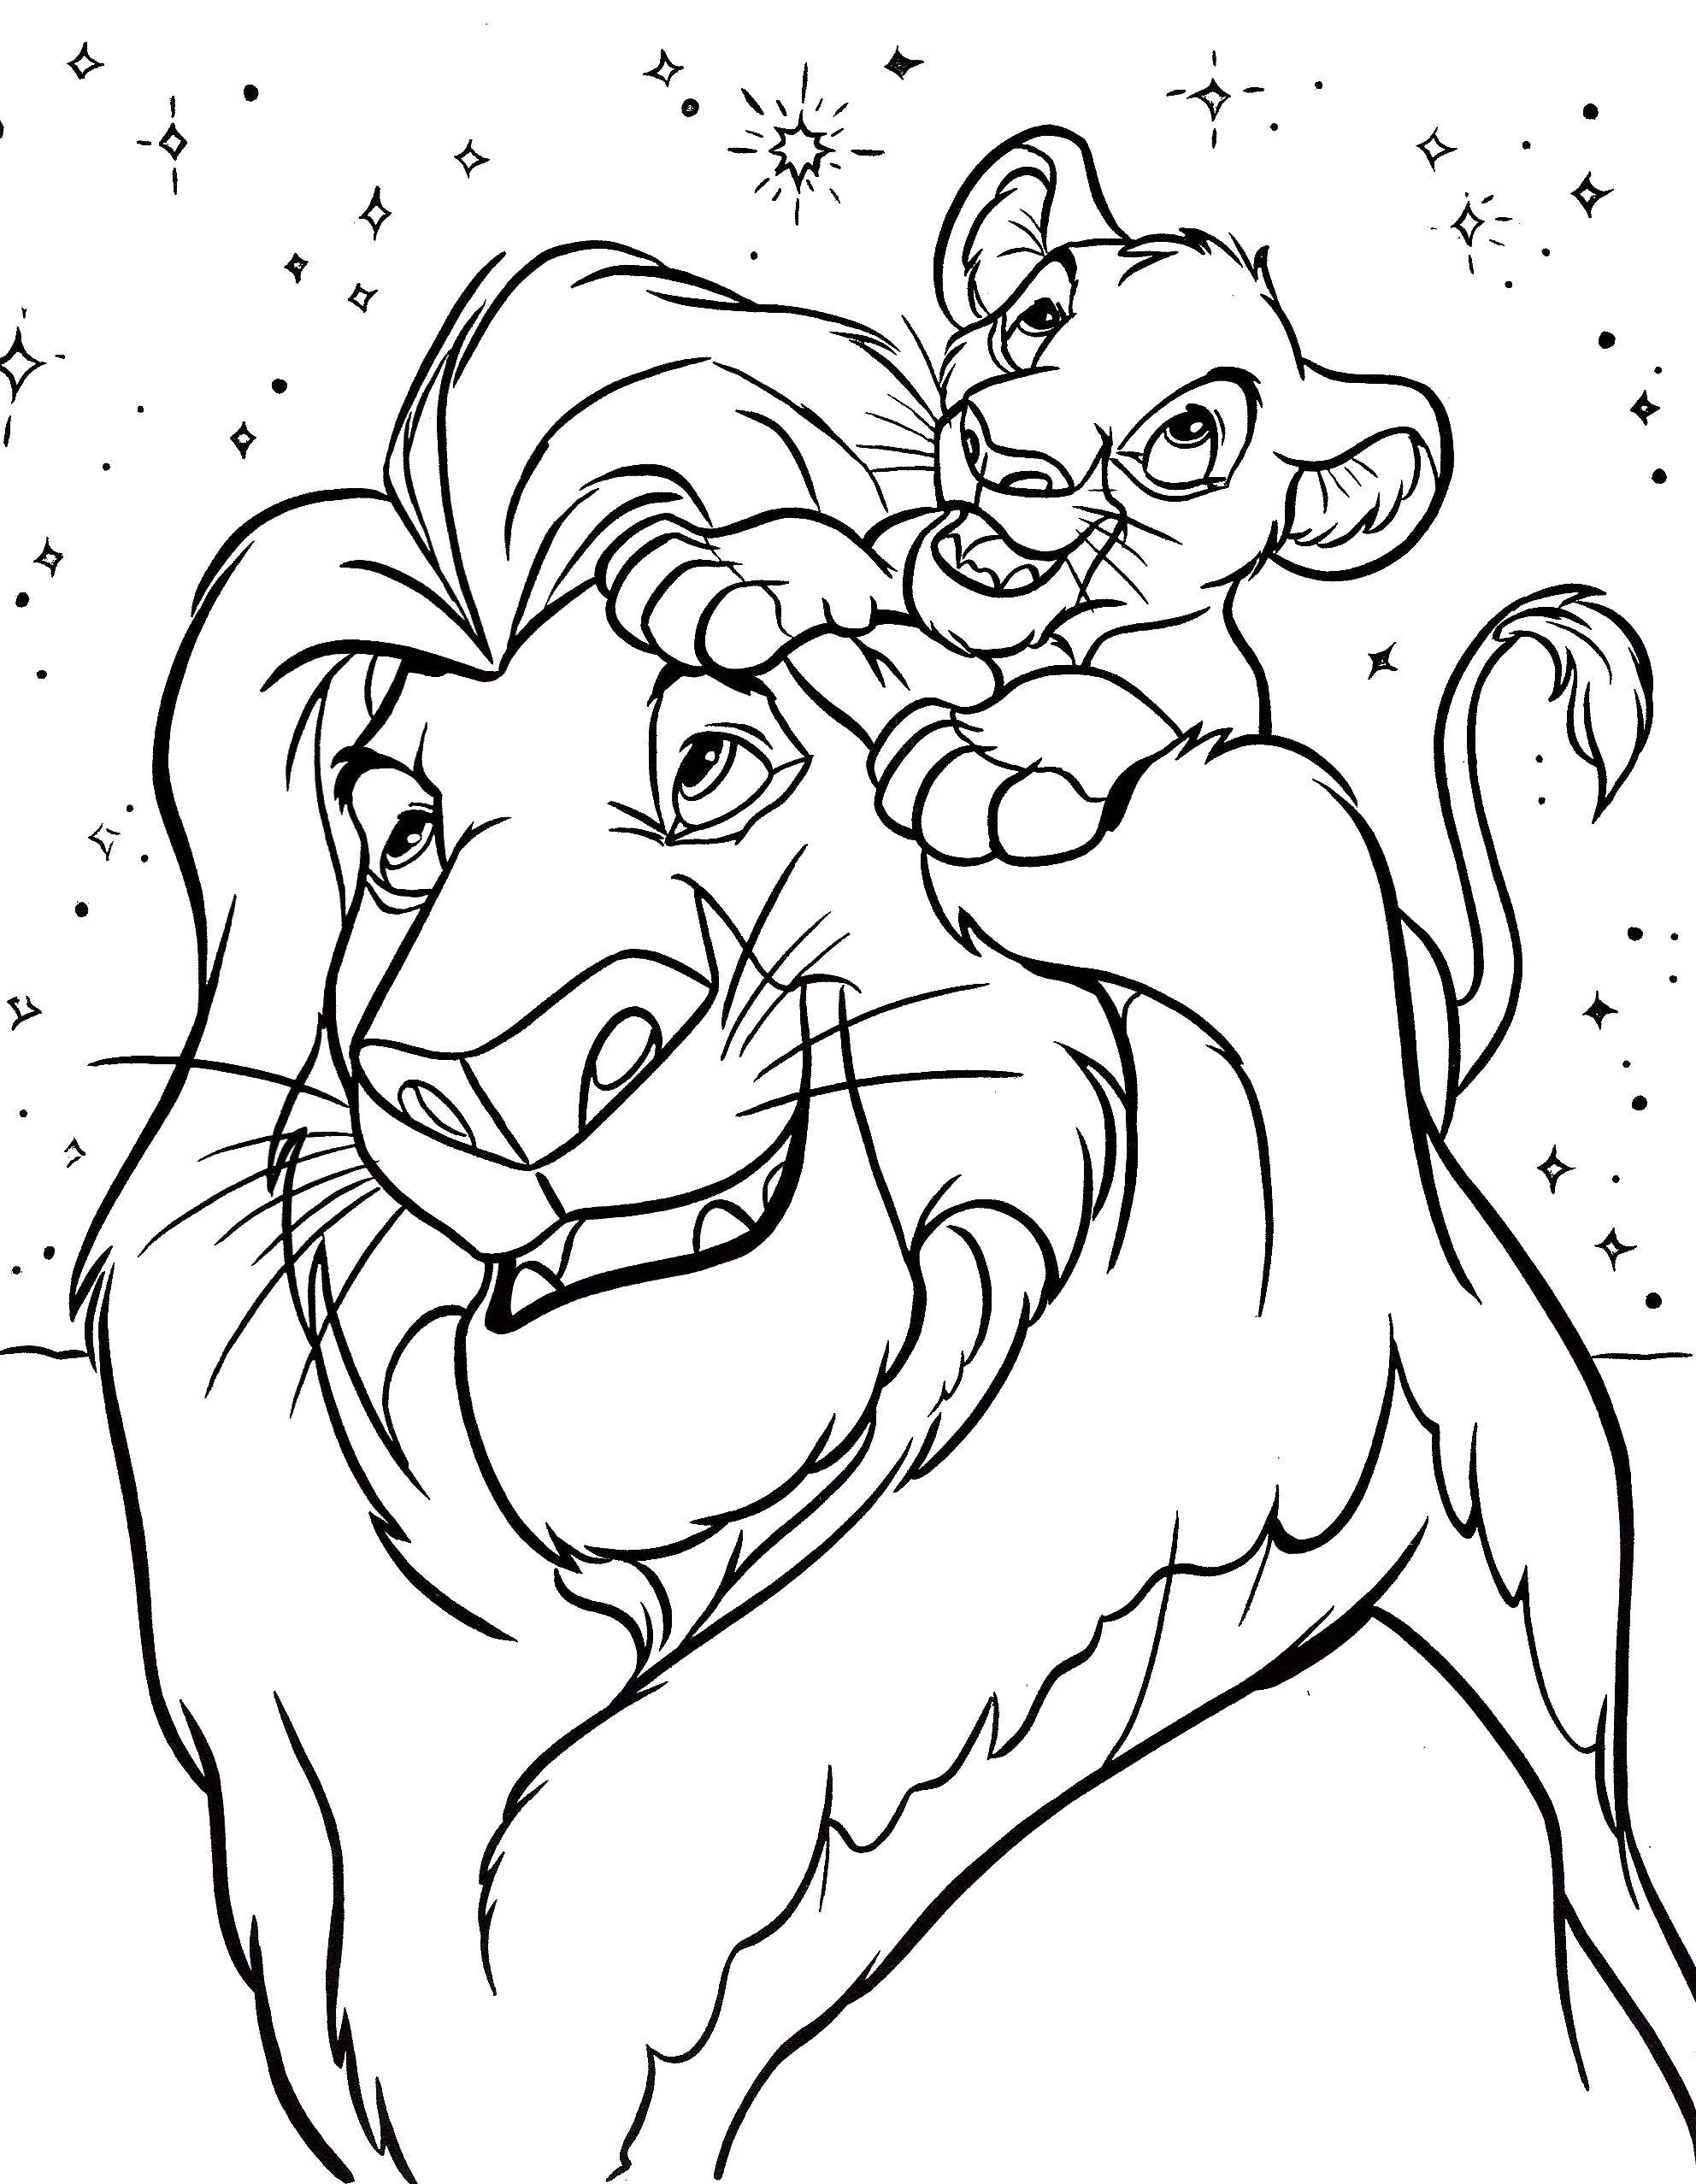 Coloring Lion and lion cub. Category Disney coloring pages. Tags:  Disney cartoons, the lion king, lions.